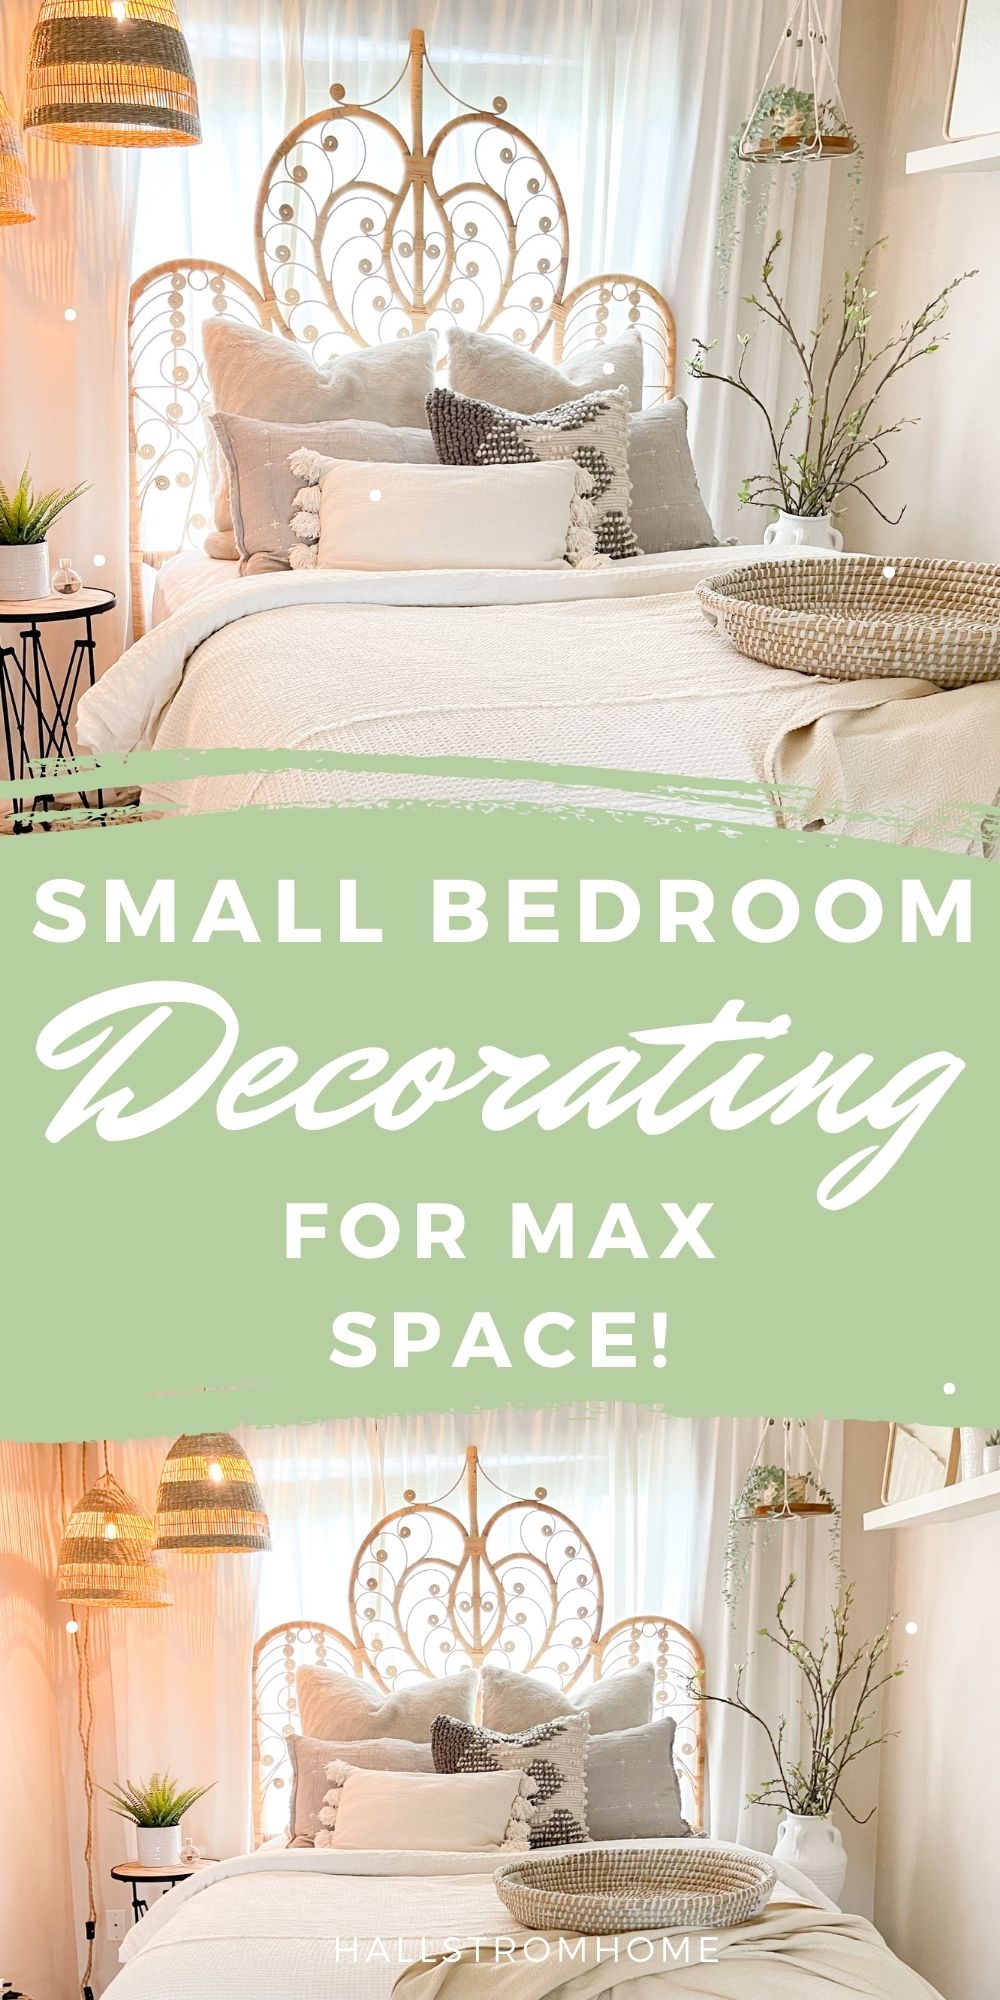 Small Bedroom Organization Ideas: Make The Most Of Your Space  Small  bedroom organization, Small room bedroom, Small bedroom